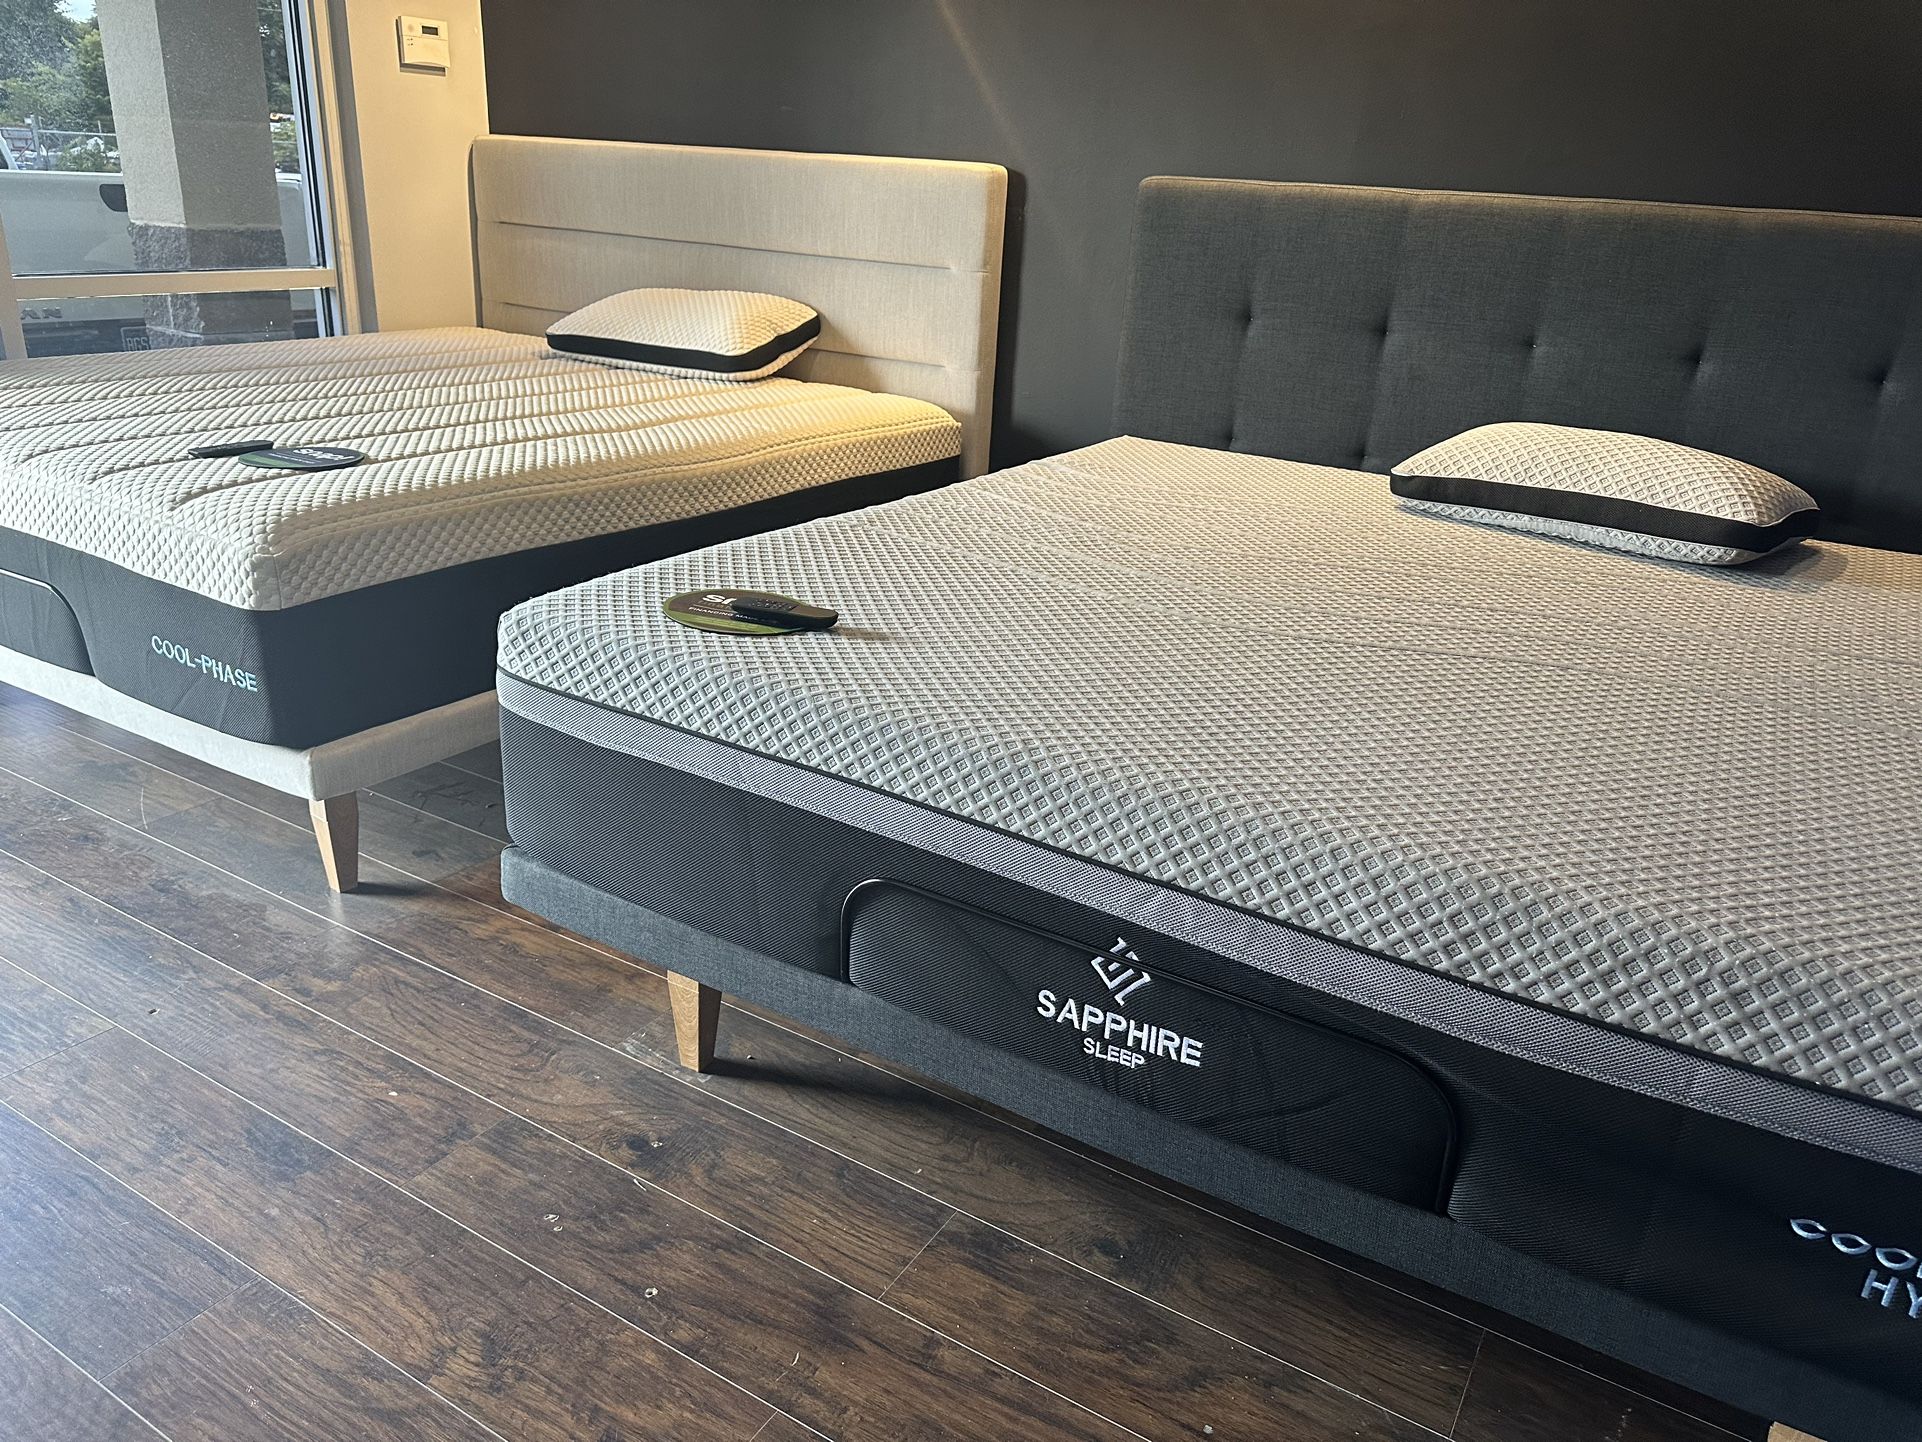 Last Chance to Grab a Mattress At 30-80% Off!